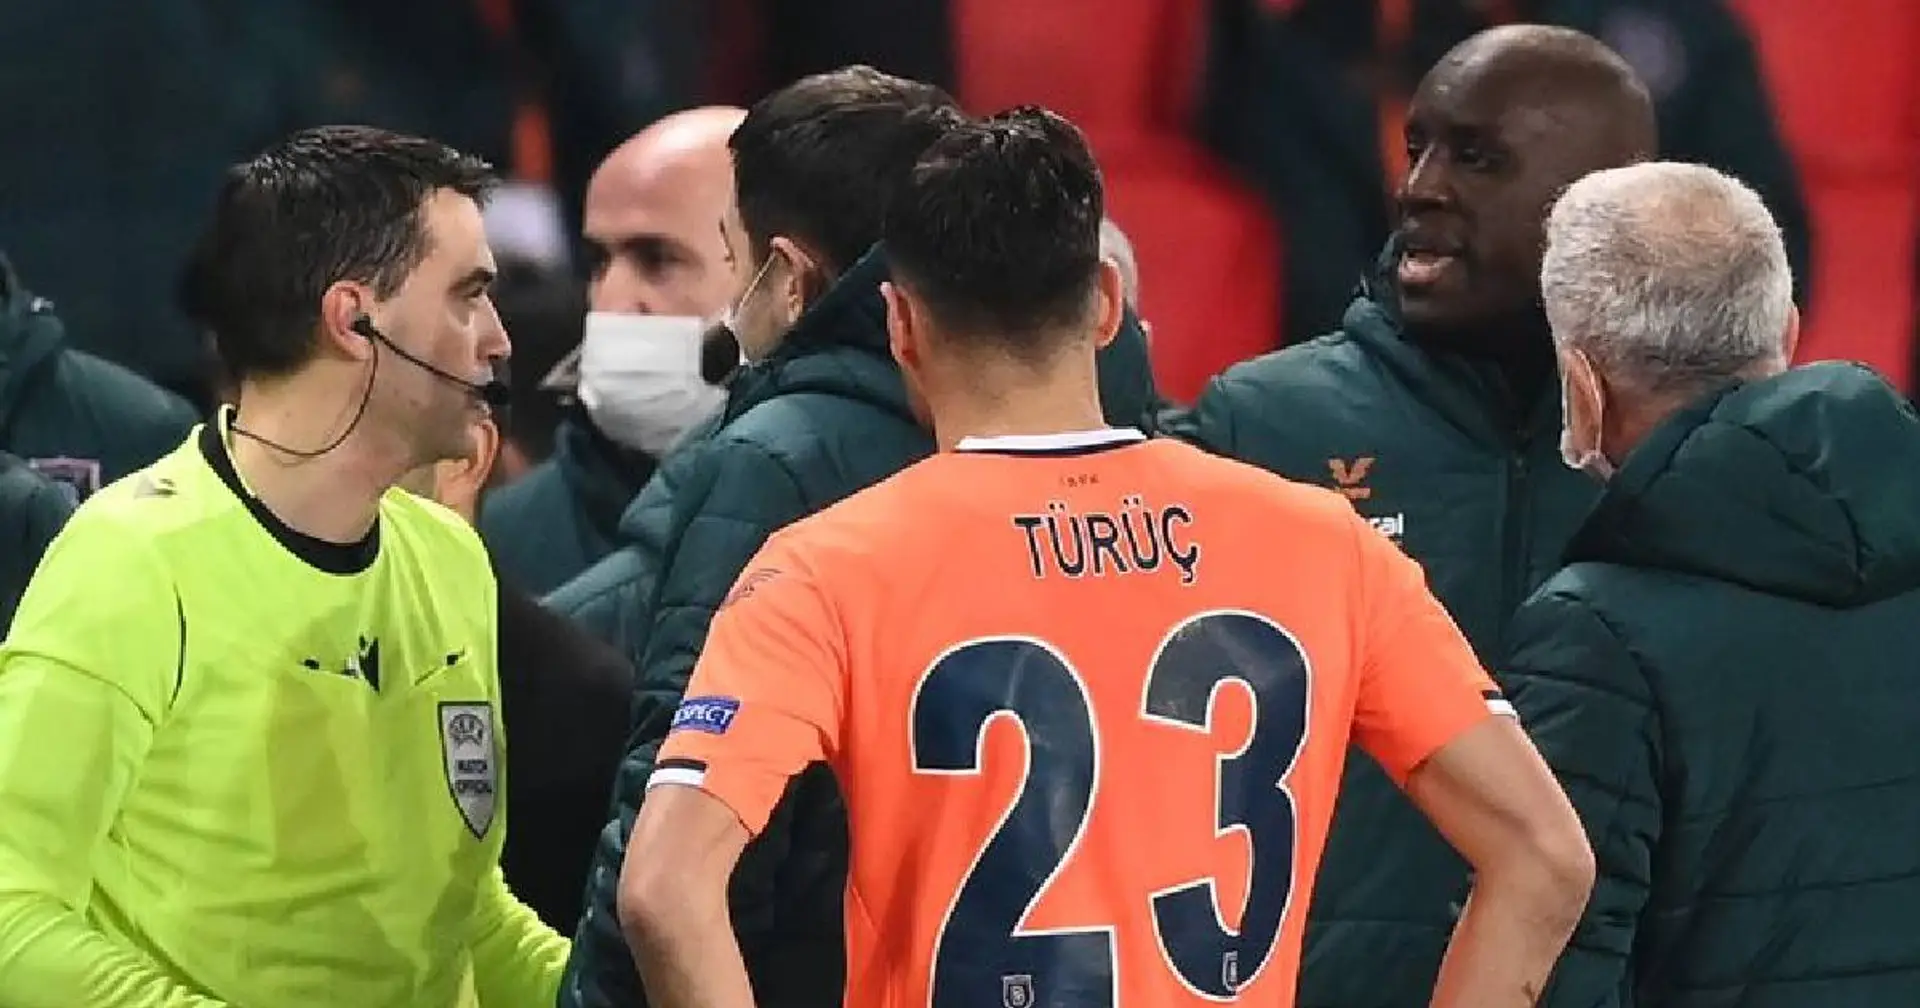 PSG vs Istanbul suspended, both teams leave pitch after alleged racism from official